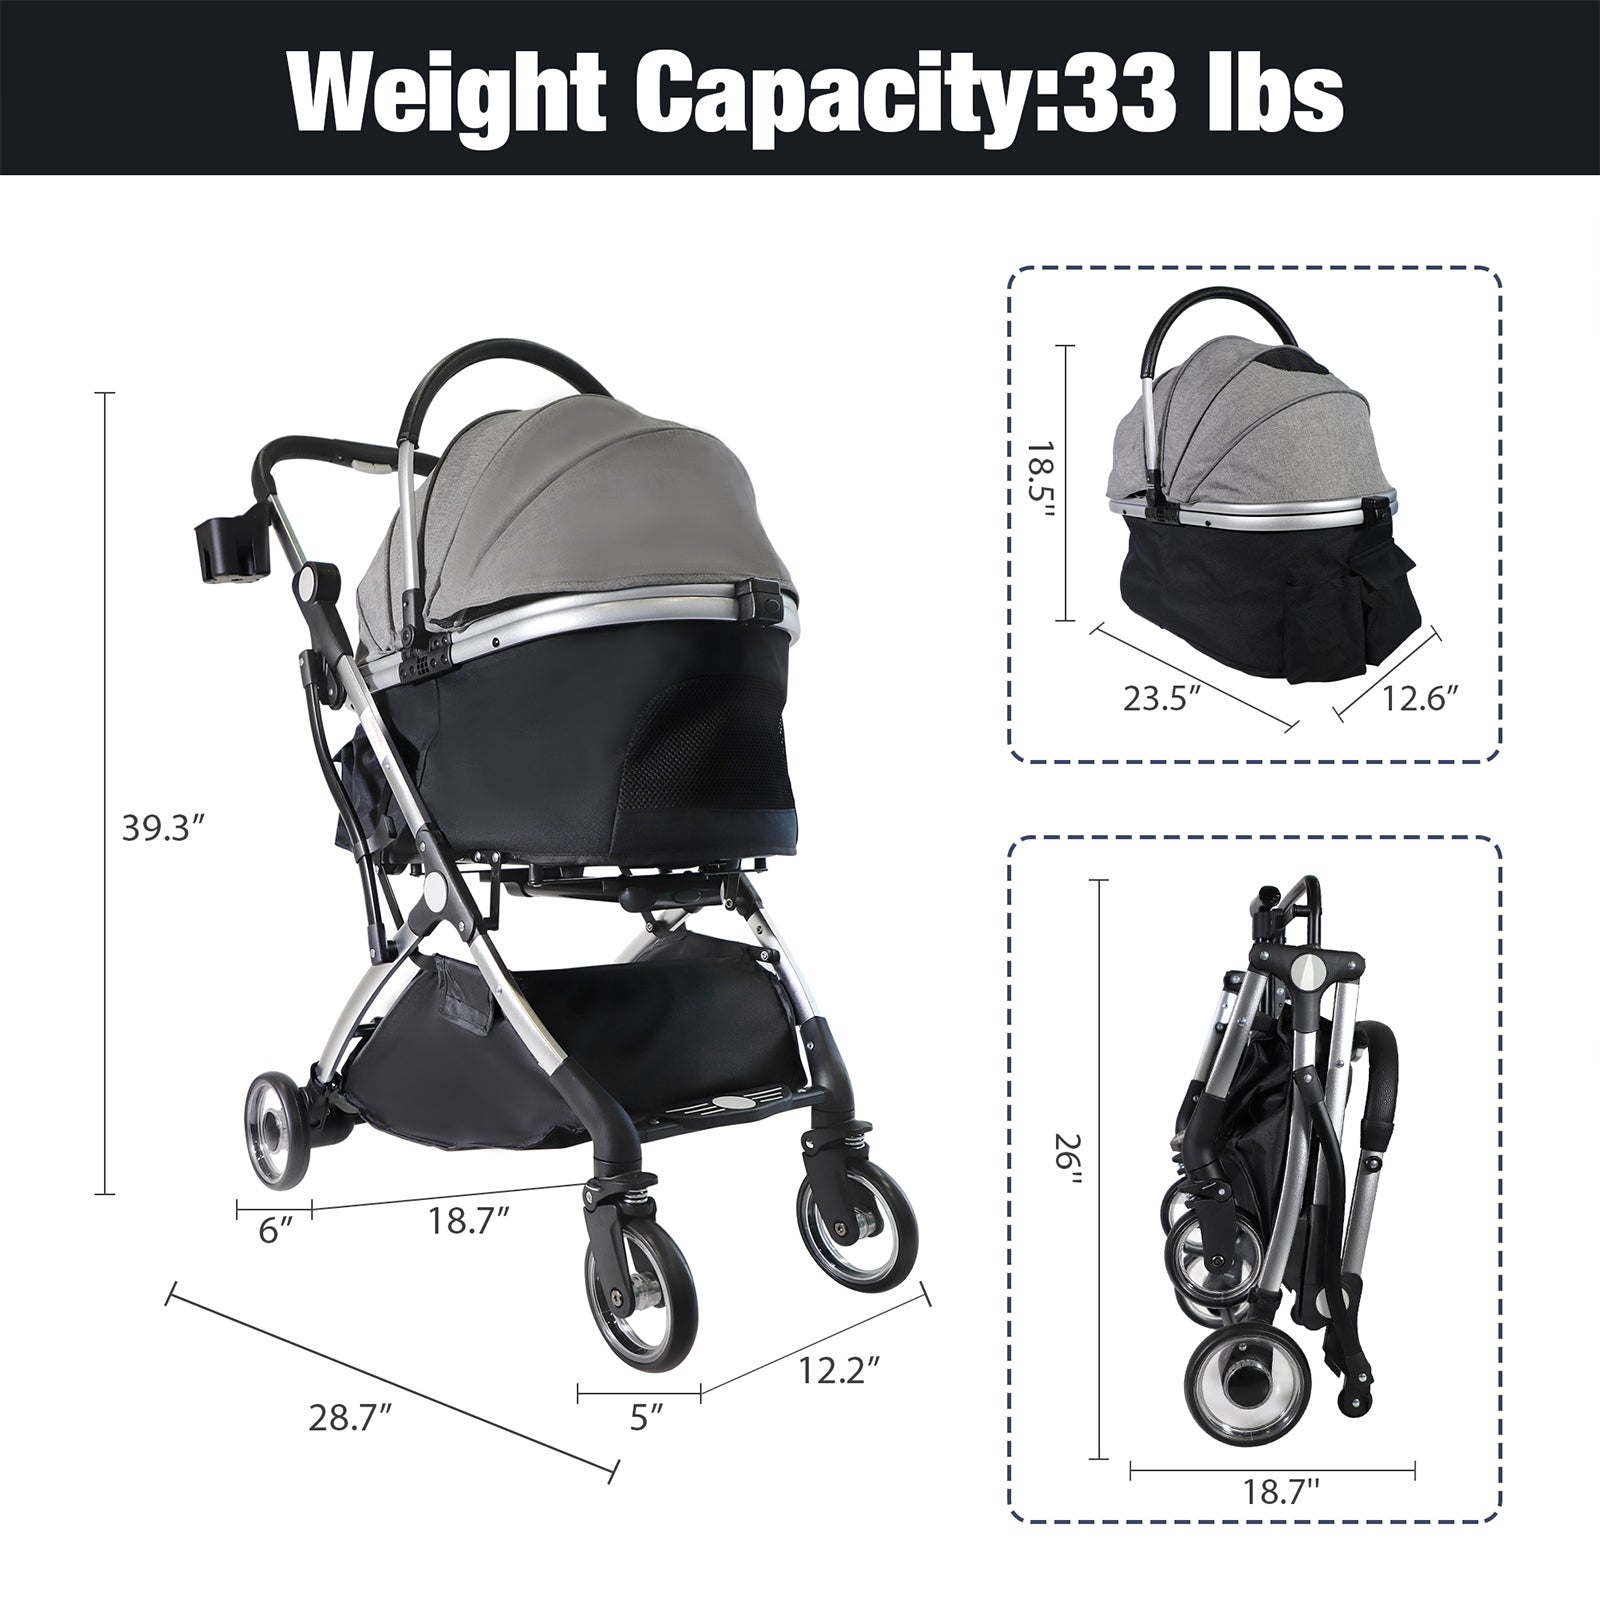 3 in 1 Travel Dog Stroller Pet Carrier with Detachable Carrier & Adjustable Handle, Gray